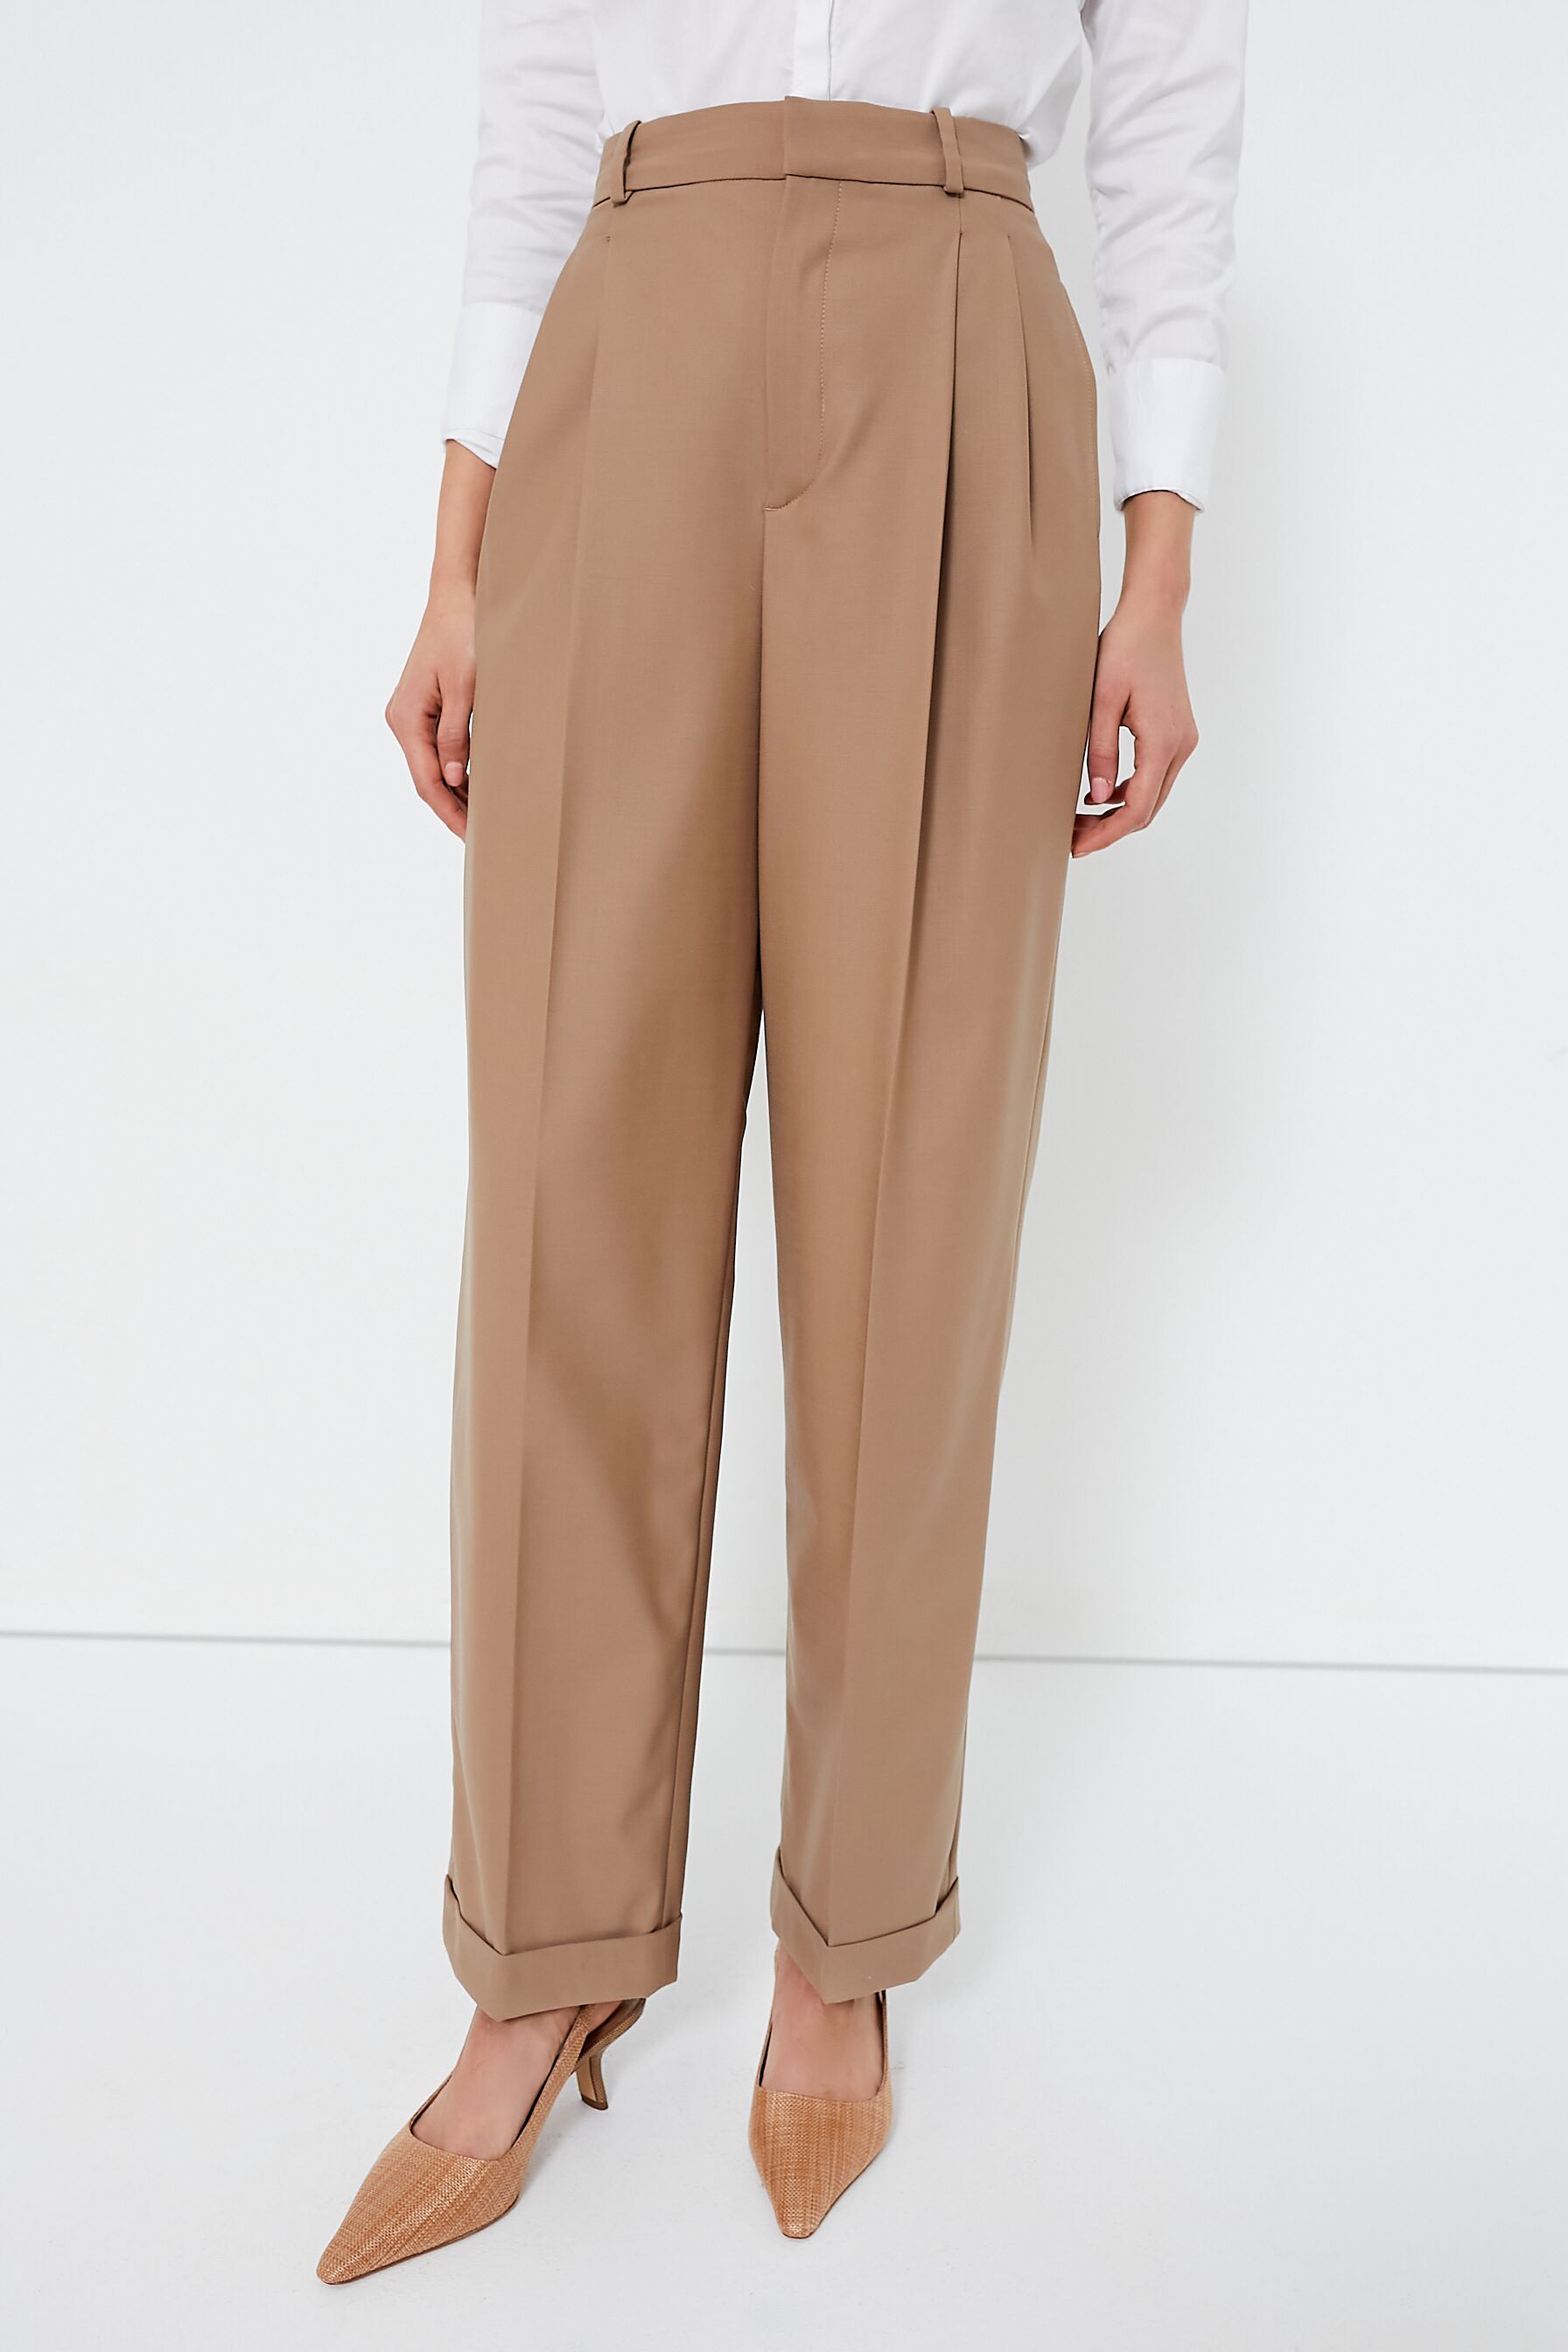 Forever 21 Women's Pleated Button-Front Trousers in Fiery Red Small |  CoolSprings Galleria